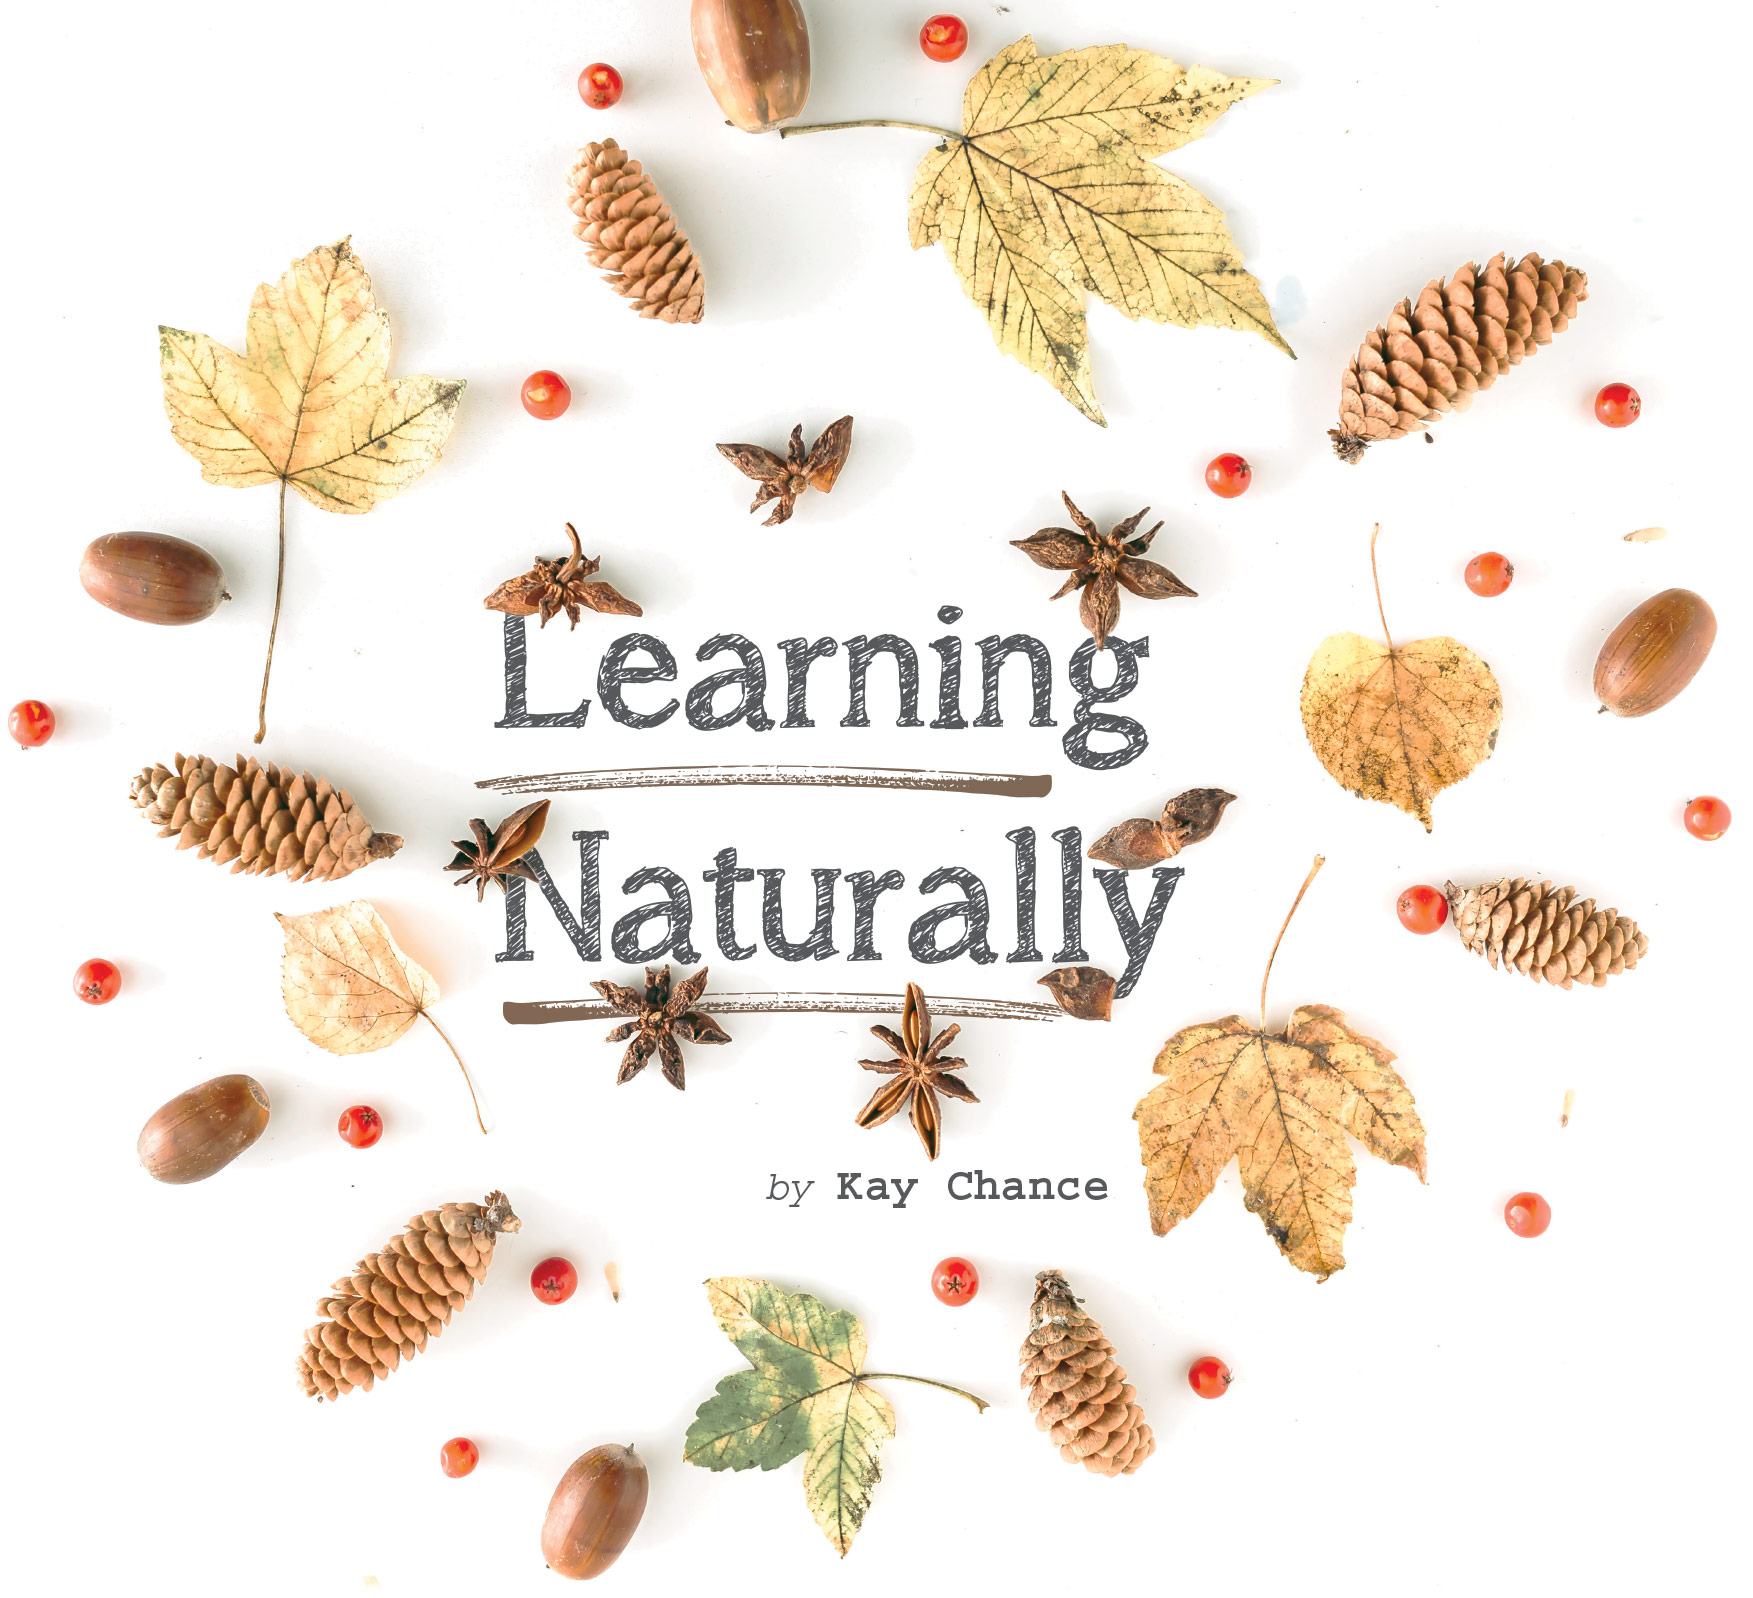 Learning Naturally by Kay Chance